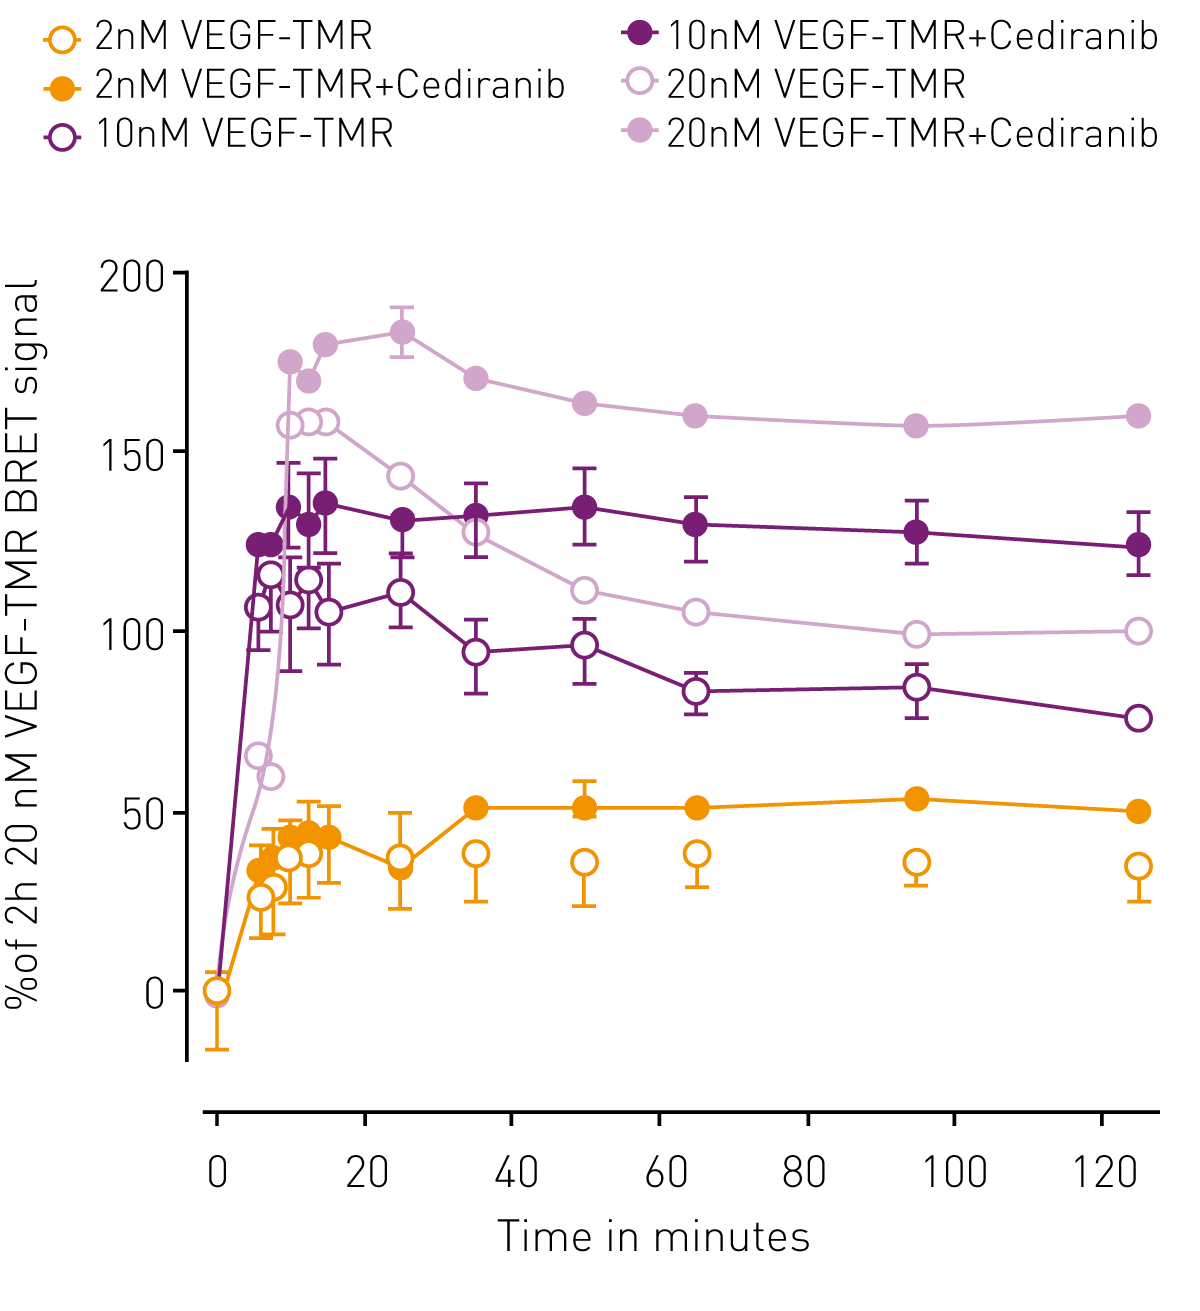 Fig. 4: The effect of the receptor tyrosine kinase inhibitor cediranib on VEGF165a-TMR binding to VEGFR2 was monitored for 2 h. In the absence of the inhibitor, the ligand initially binds to VEGFR2 with a peak BRET signal obtained at approximately 15 min after ligand addition (Fig. 4, empty symbols). At later time points, the BRET signal reduces because of receptor internalization and subsequent complex dissociation. In contrast, presence of the RTKI cediranib prevents internalization and stabilizes the interaction for the period of the experiment (2 h). This becomes visible by sustained high BRET ratios (Fig. 4 full symbols). Data taken from reference 1.